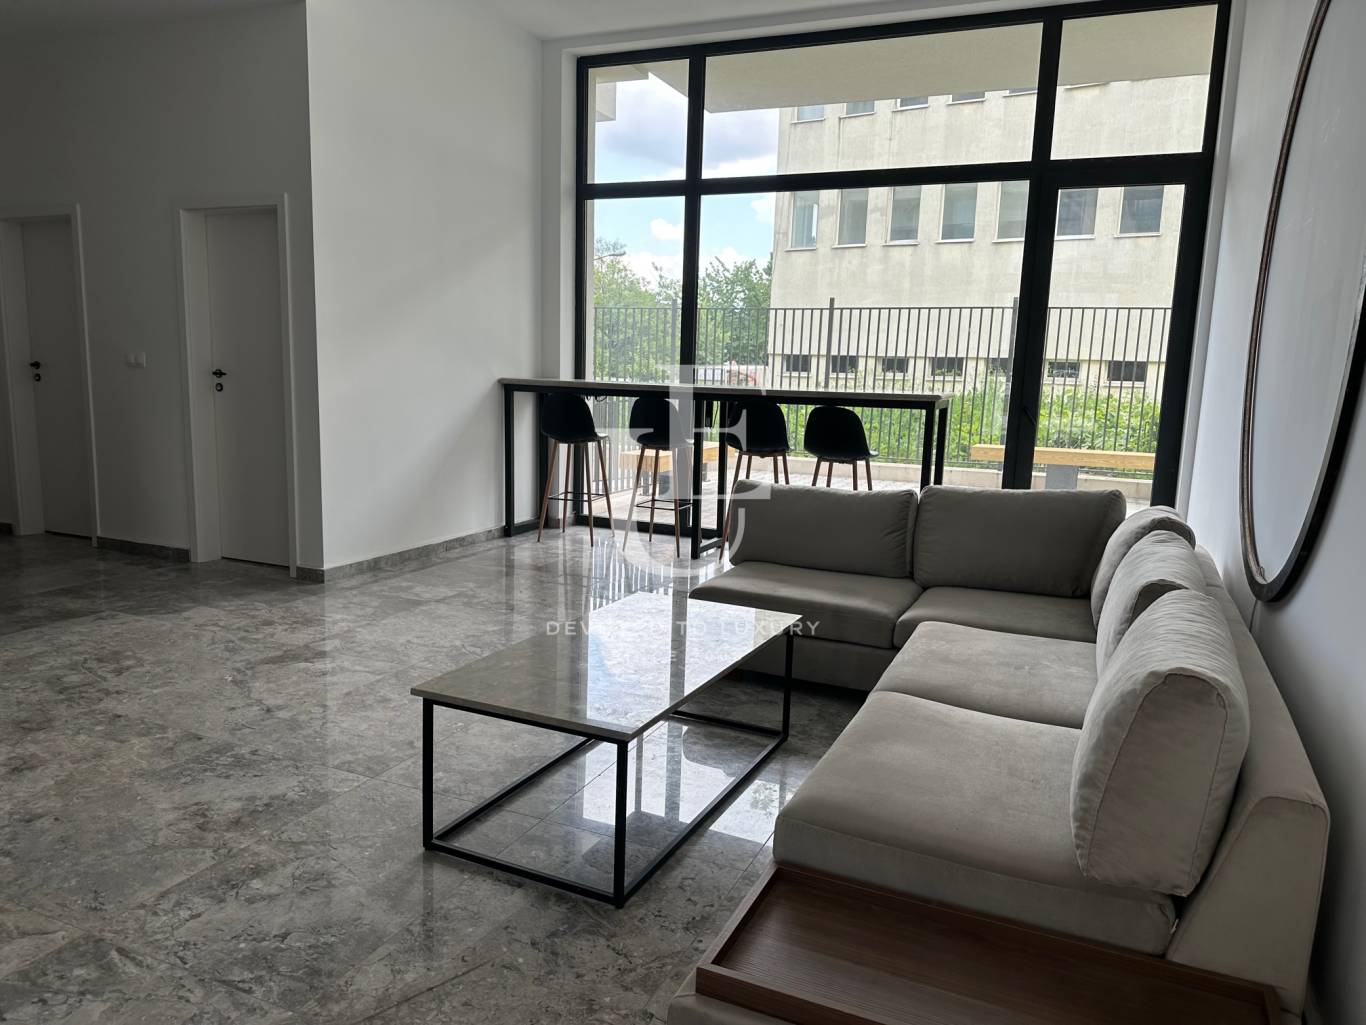 Apartment for sale in Sofia, Hladilnika with listing ID: K14763 - image 2